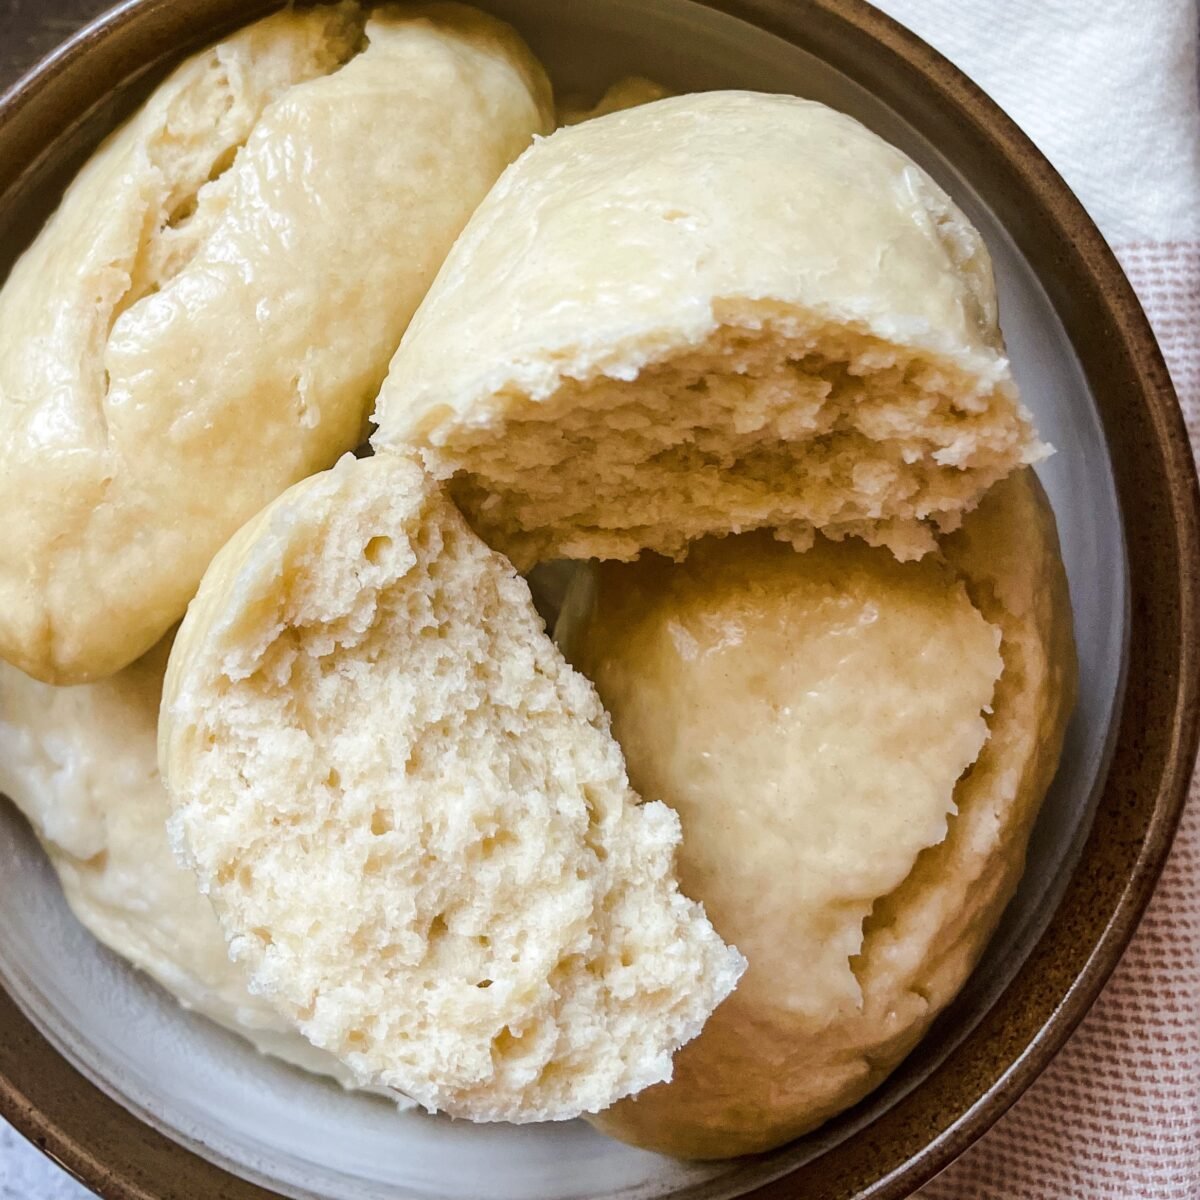 Several Guyanese Duff in a grey and brown bowl with one duff split in half showing a cross section of the duff.